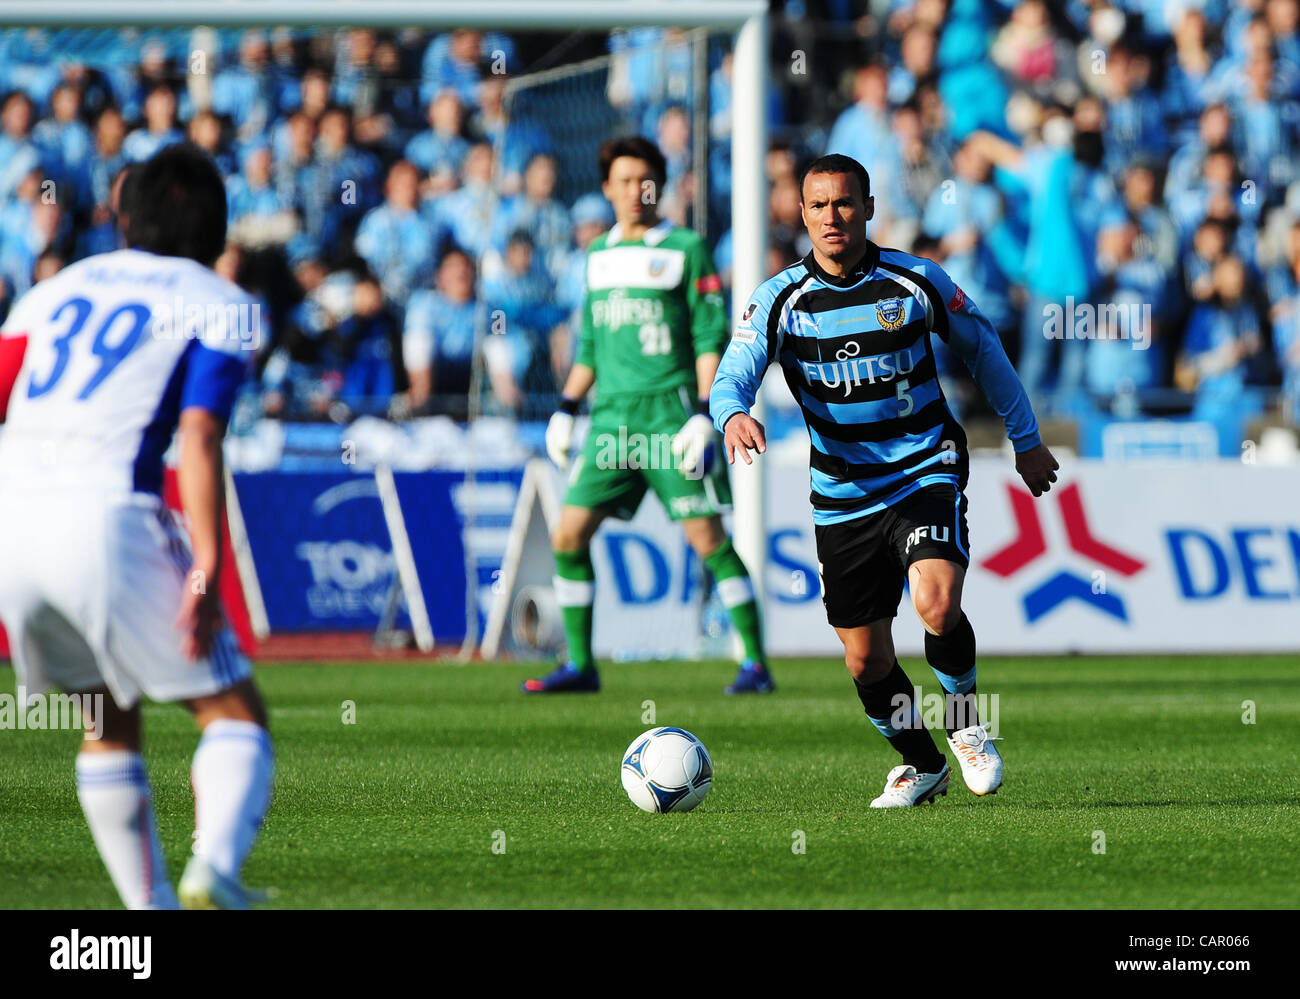 Kawasaki Frontale 0 1 F C Tokyo High Resolution Stock Photography and  Images - Alamy